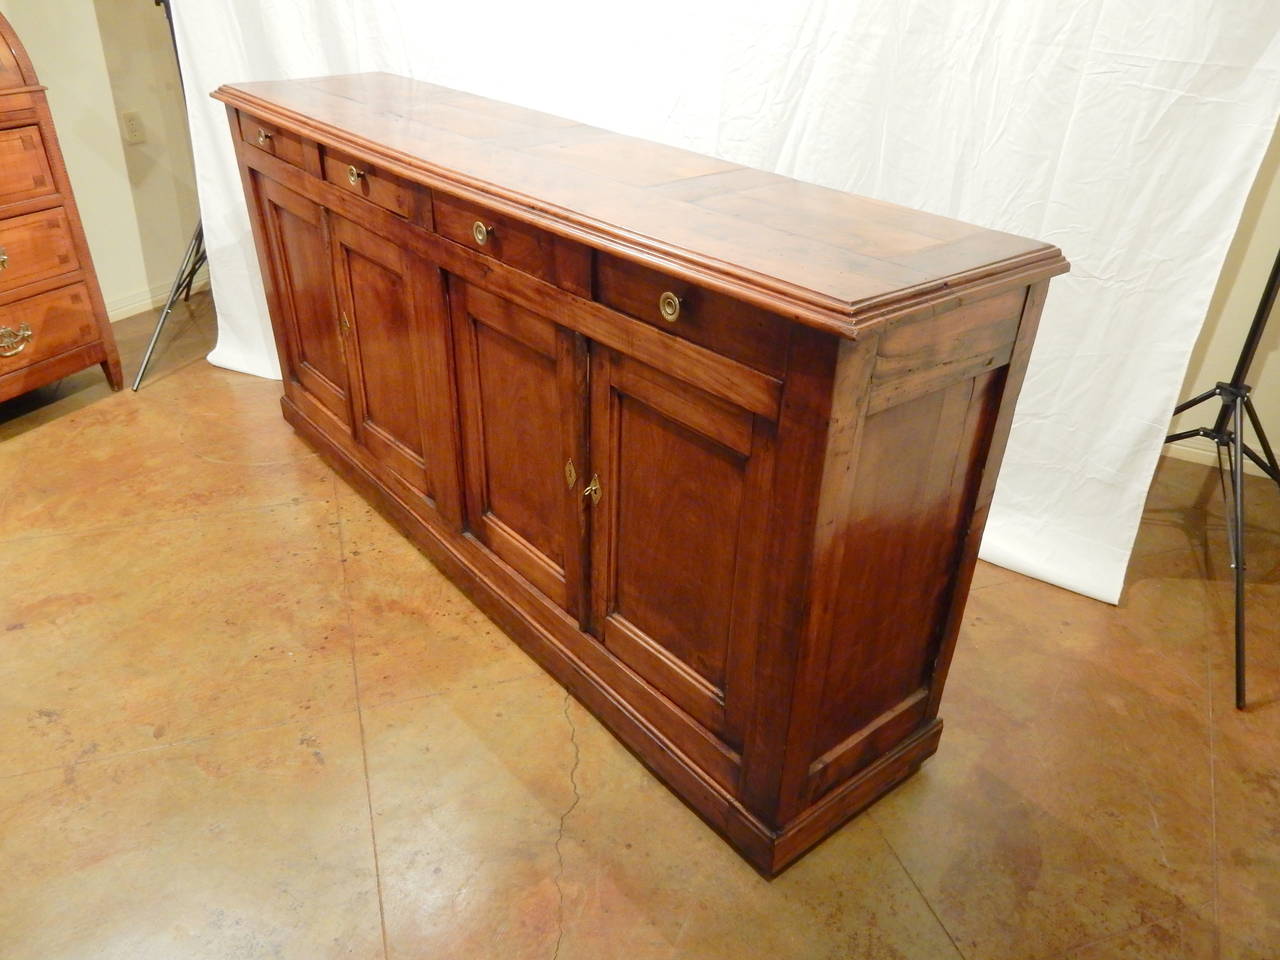 Long narrow French 19th century walnut four-door and four-drawer enfilade. Carefully restored to maintain it's warm patina.